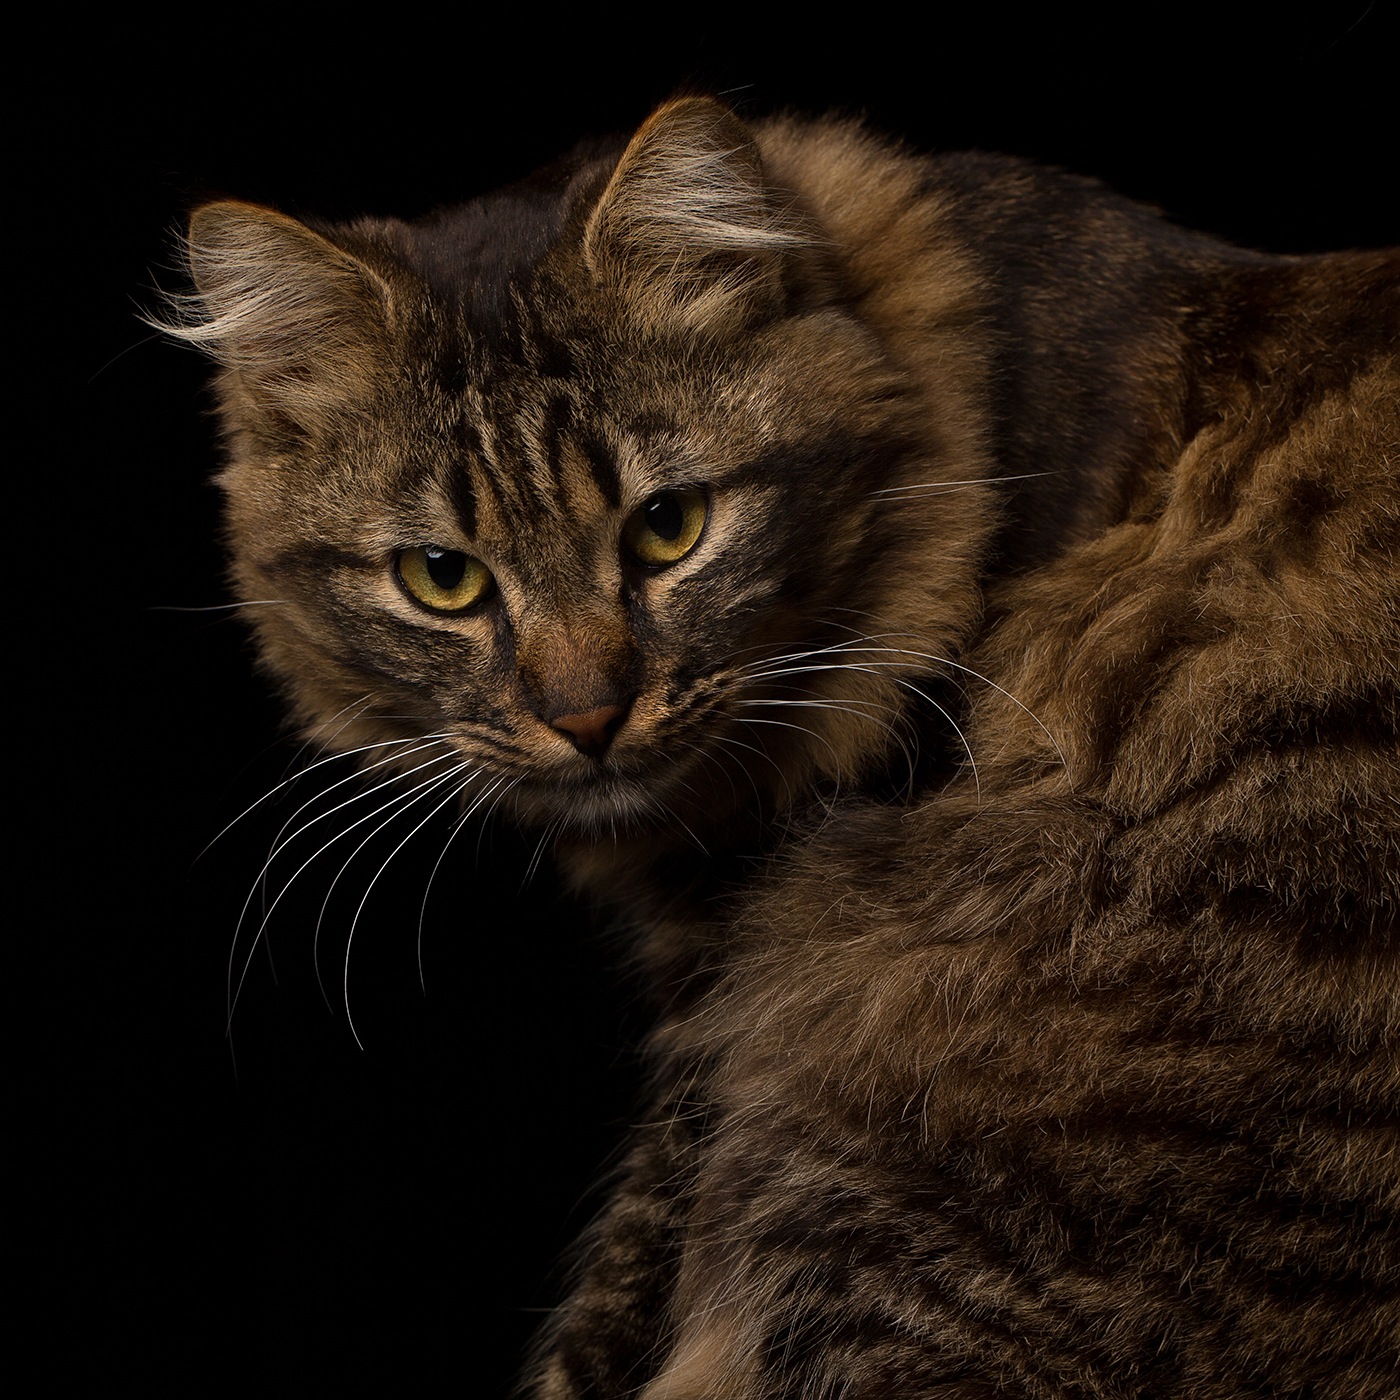 photographe-animaux-domestiques-chat-guillaume-heraud-06-small